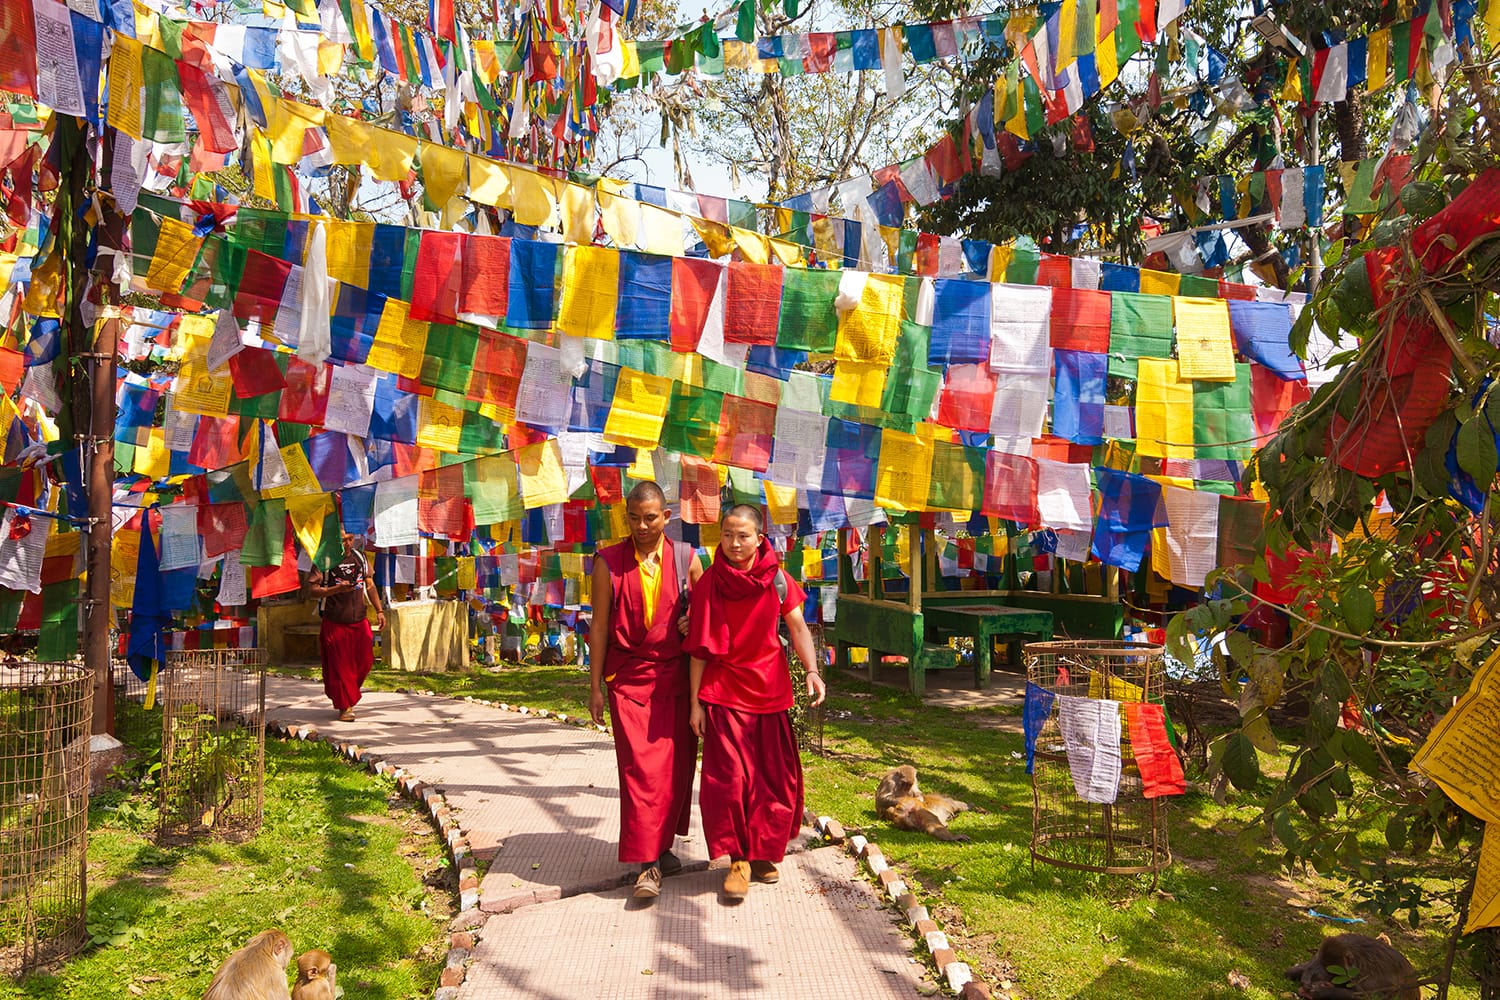 Tibetan monks walk through a temple pathway surrounded by colorful tibetan prayer flags in Darjeeling, West Bengal, India.